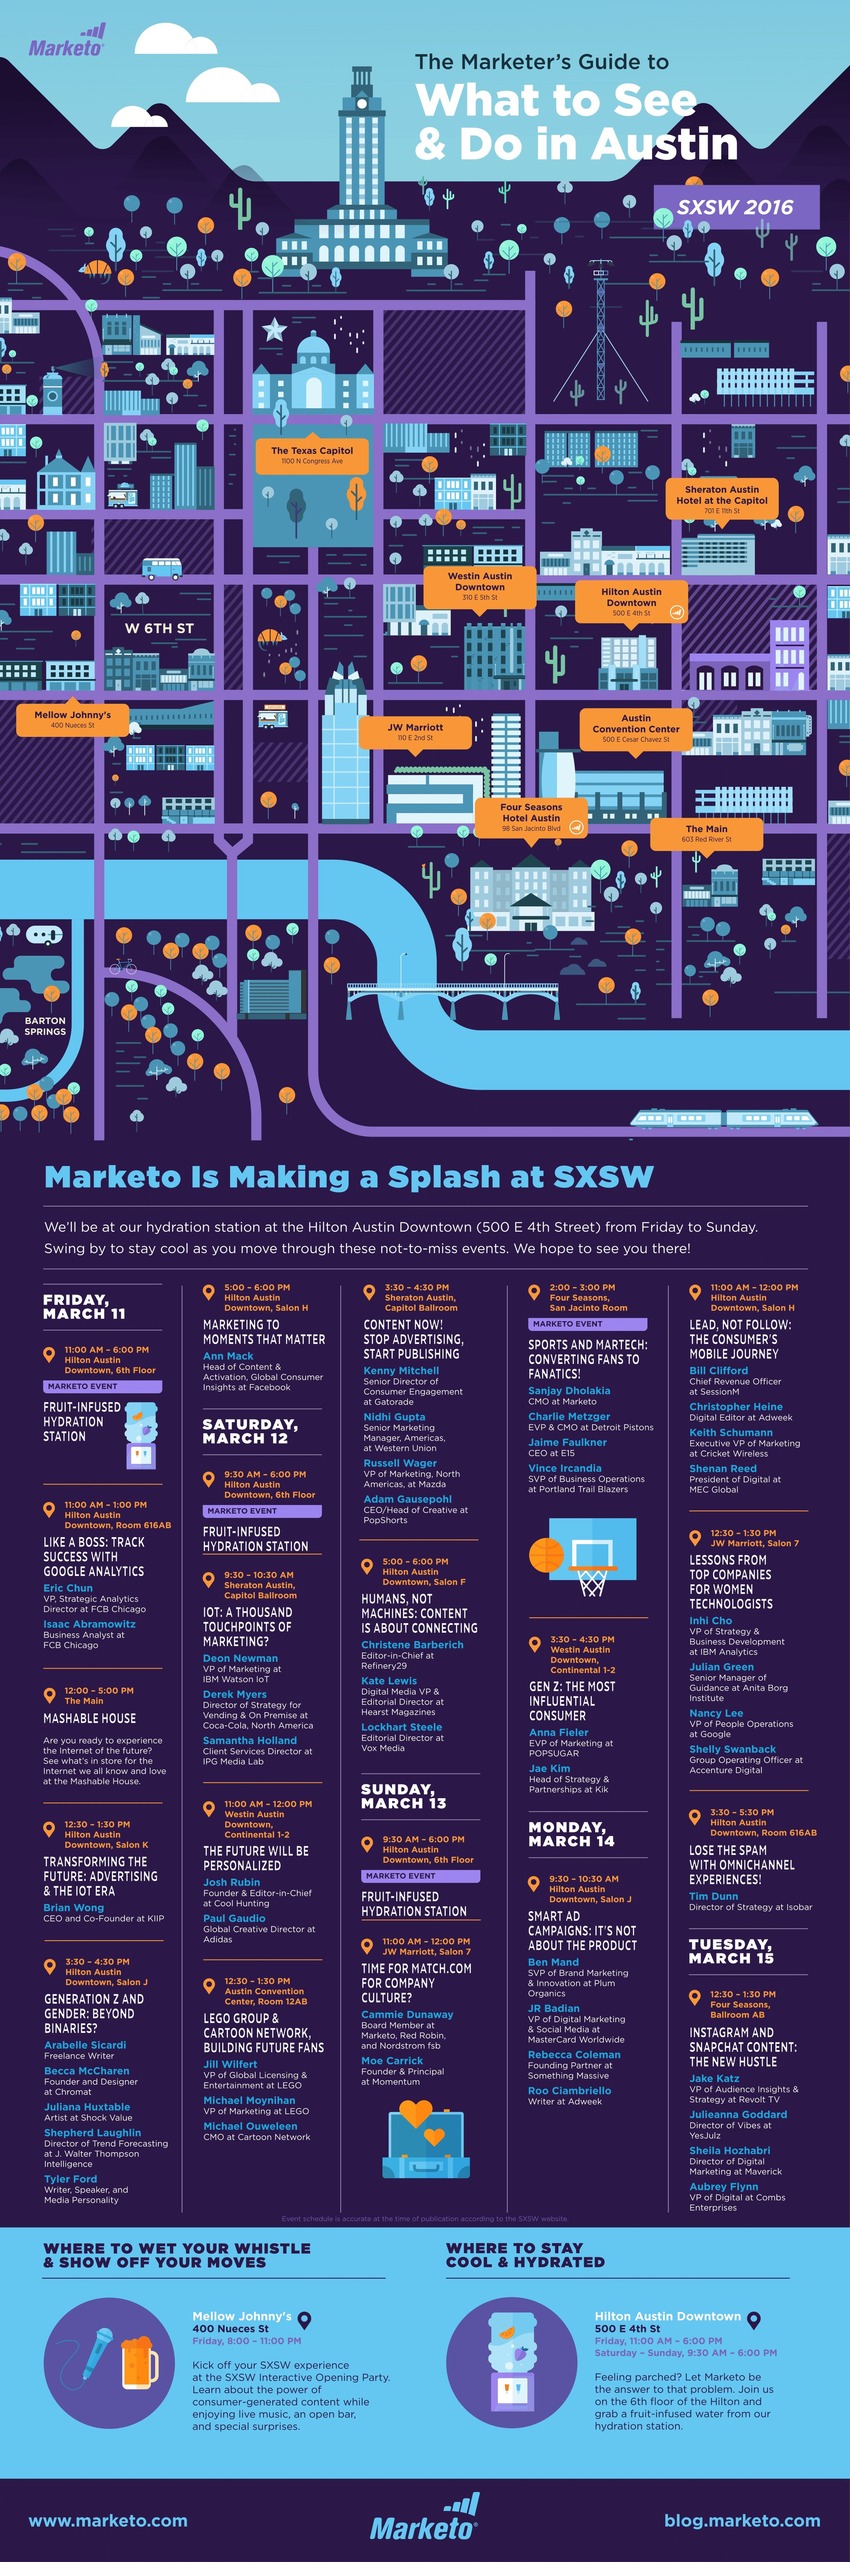 The Marketer's Guide to SXSW [Infographic] - Marketo | The MarTech Digest | Scoop.it